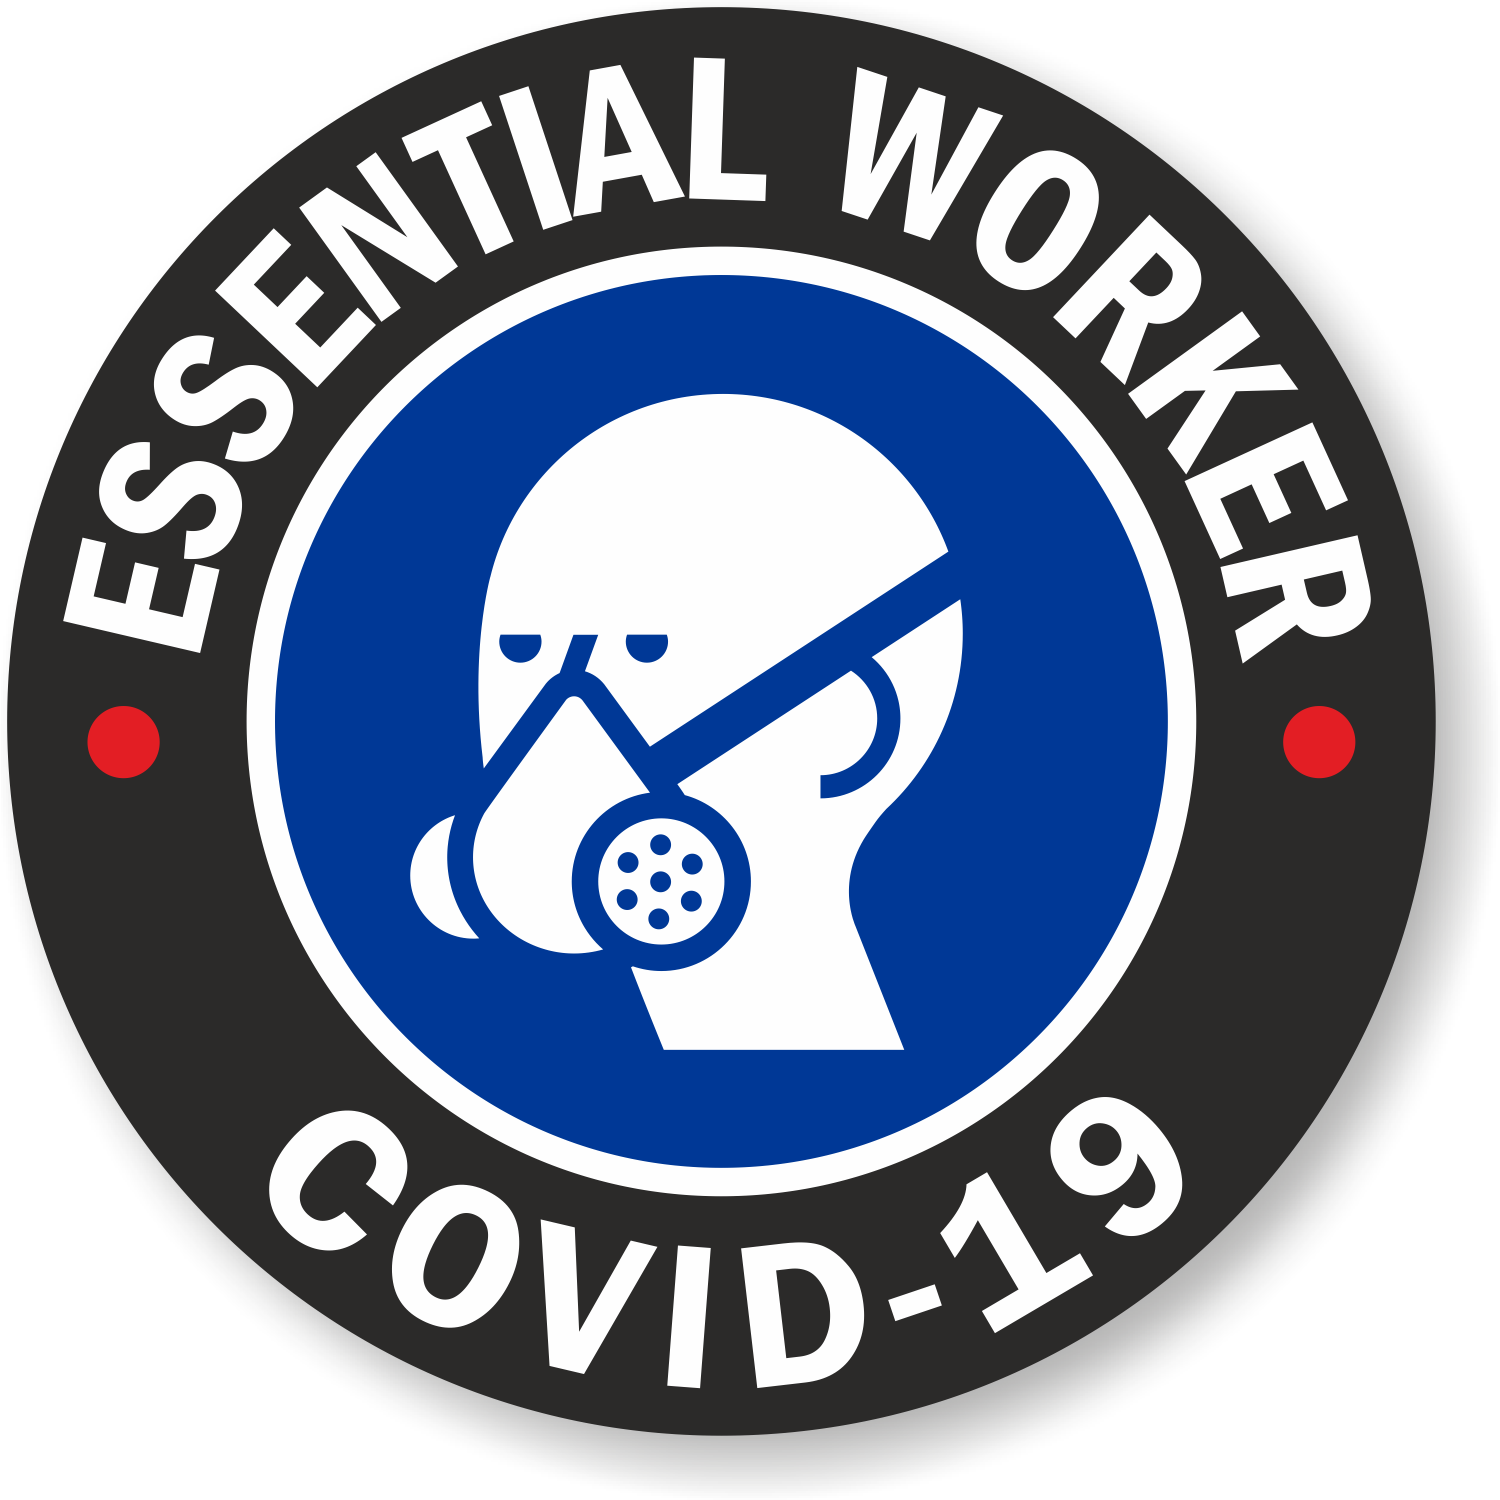 12 PACK 2" Essential Worker Hard Hat Sticker VARIETY Pack Made in USA